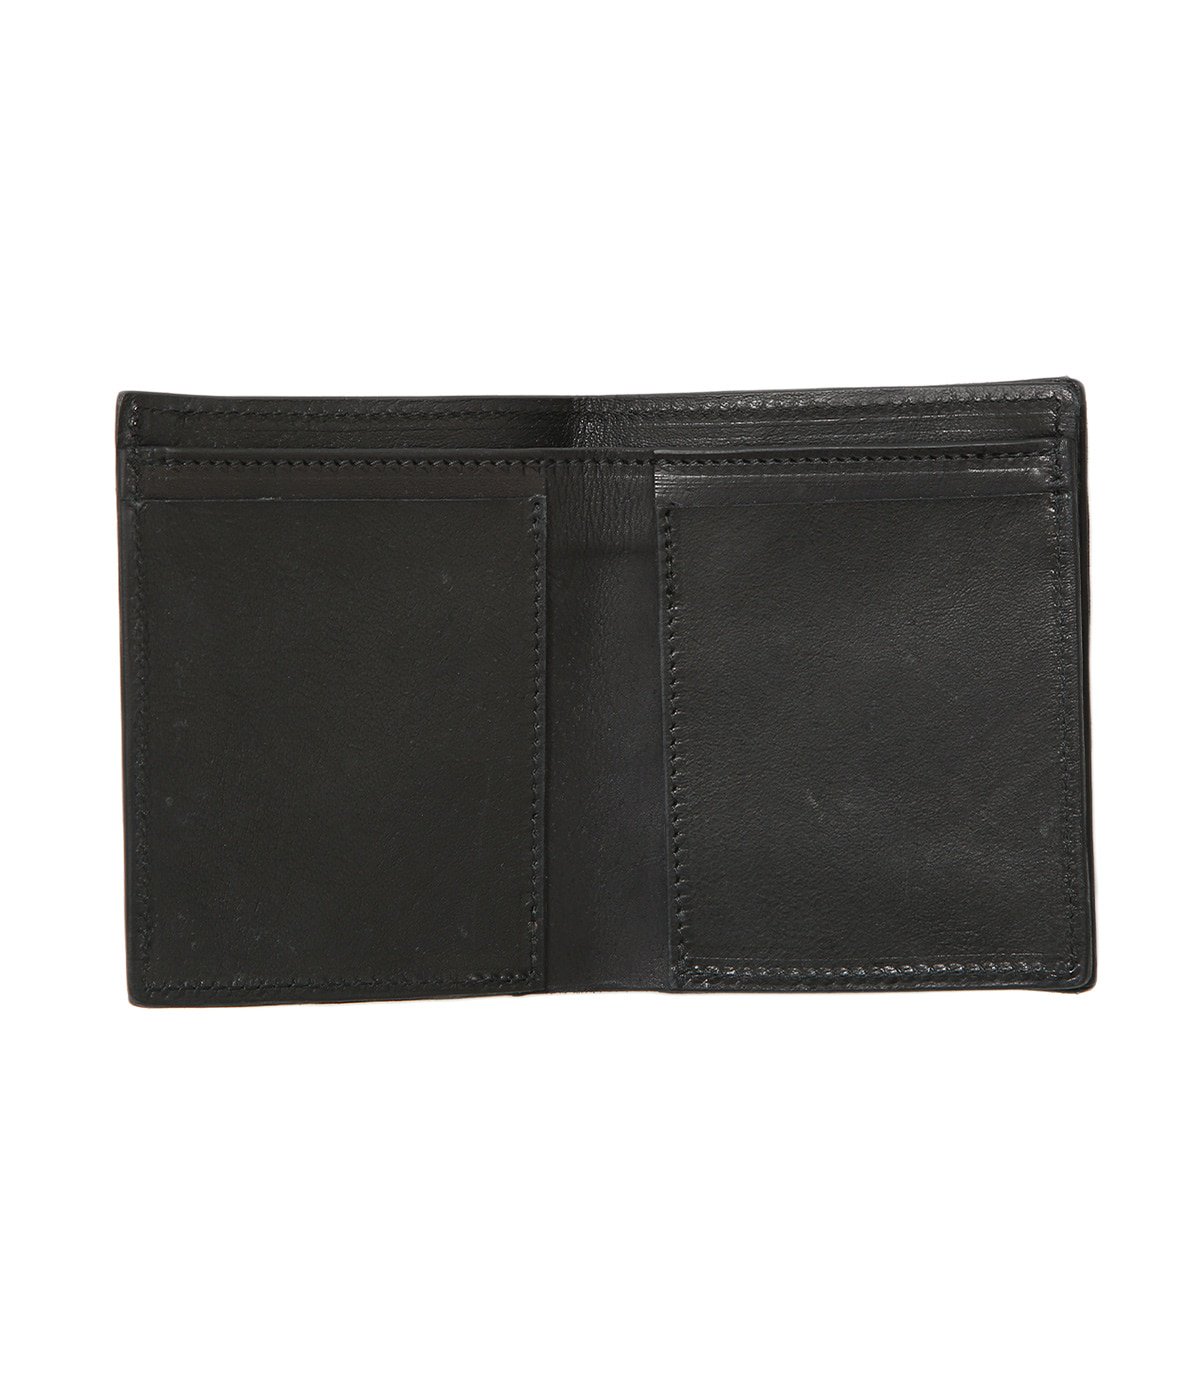 【ONLY ARK】別注 DOUBLE WALLET JAPAN